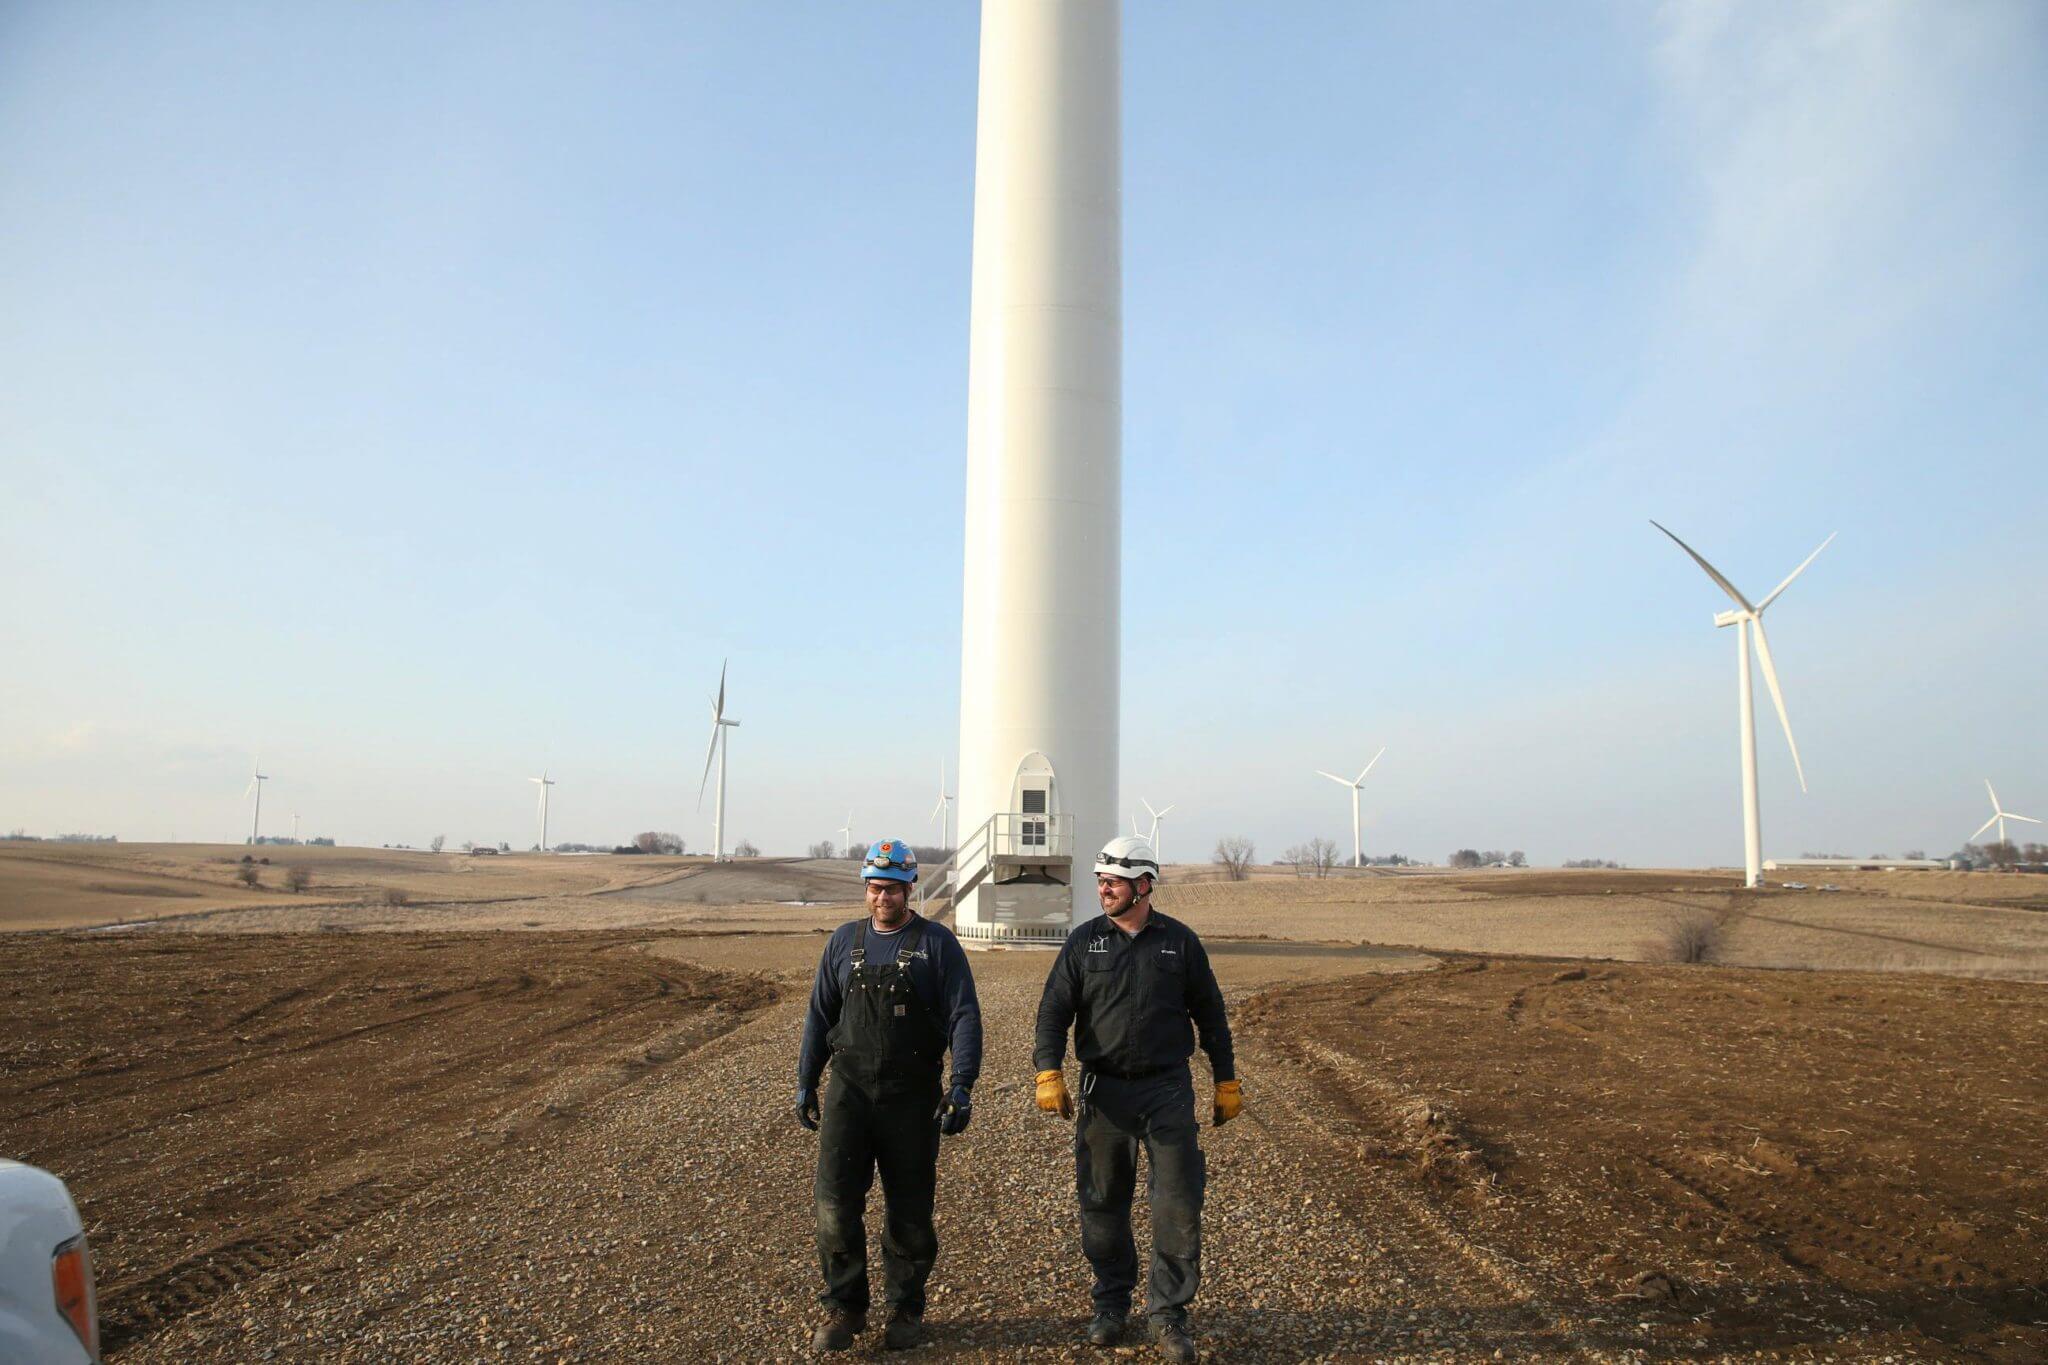 Two workers walking towards the camera, away from a wind turbine at a renewable energy project site.